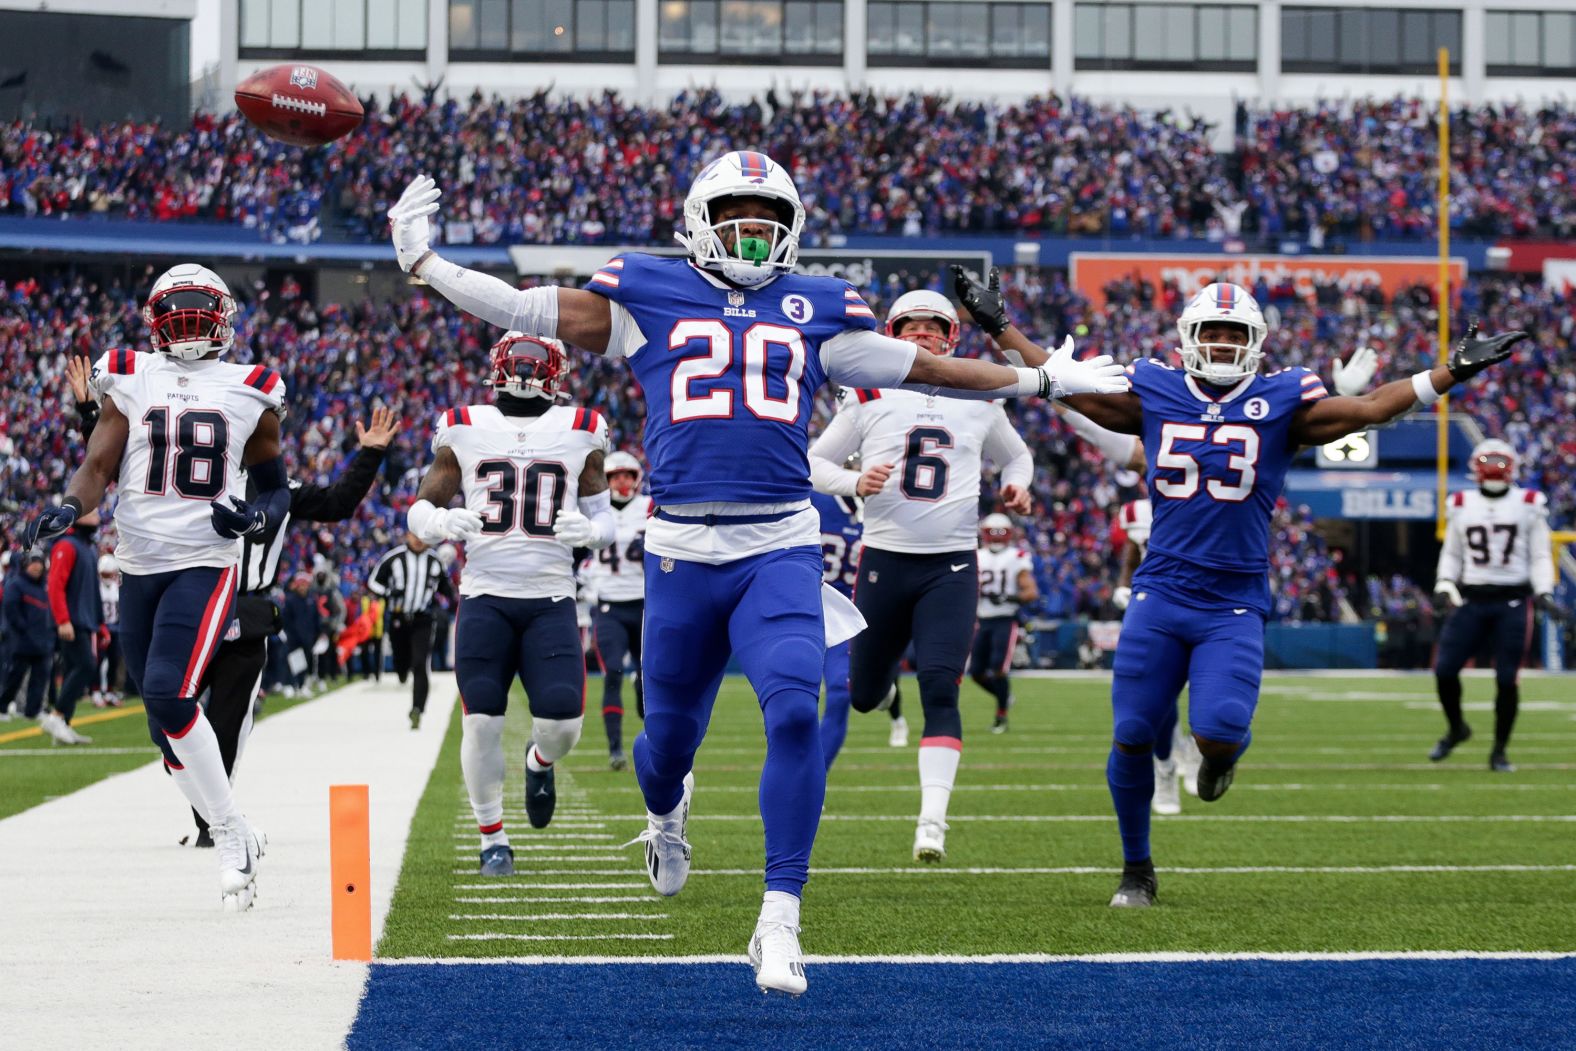 Buffalo Bills running back Nyheim Hines scores a touchdown on a kickoff return during the first half against the New England Patriots. <a href="index.php?page=&url=https%3A%2F%2Fedition.cnn.com%2F2023%2F01%2F09%2Fsport%2Fbuffalo-bills-nyheim-hines-touchdown-damar-hamlin-spt-intl%2Findex.html" target="_blank">Hines' touchdown</a> -- his first of two against New England -- came in the Bills' first play since Damar Hamlin collapsed and suffered a cardiac arrest. 